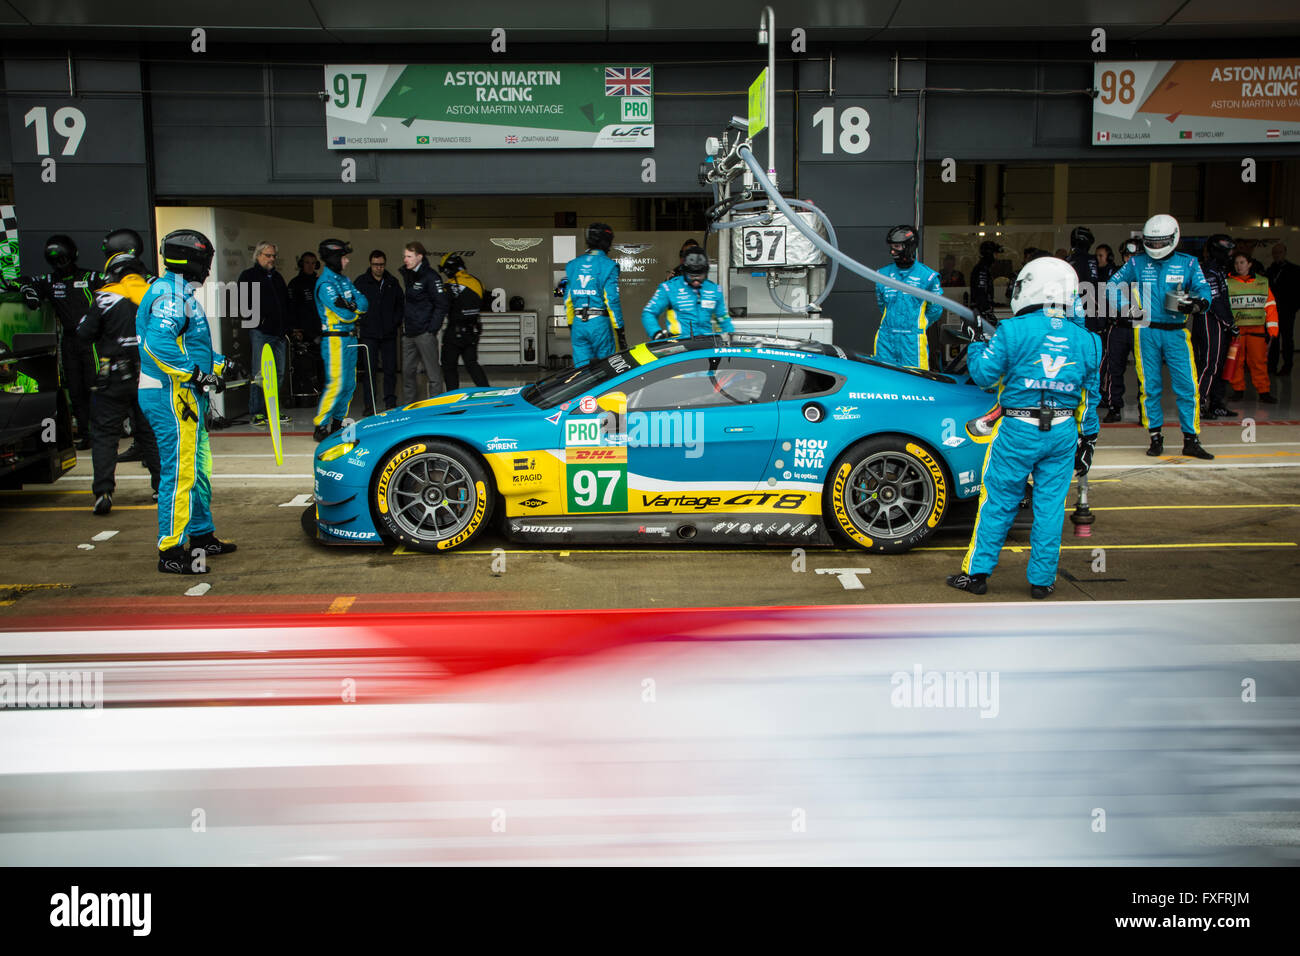 Silverstone, UK. 15th Apr, 2016. The No97 Aston Martin GTE during a pit stop in free practise one Credit:  steven roe/Alamy Live News Stock Photo